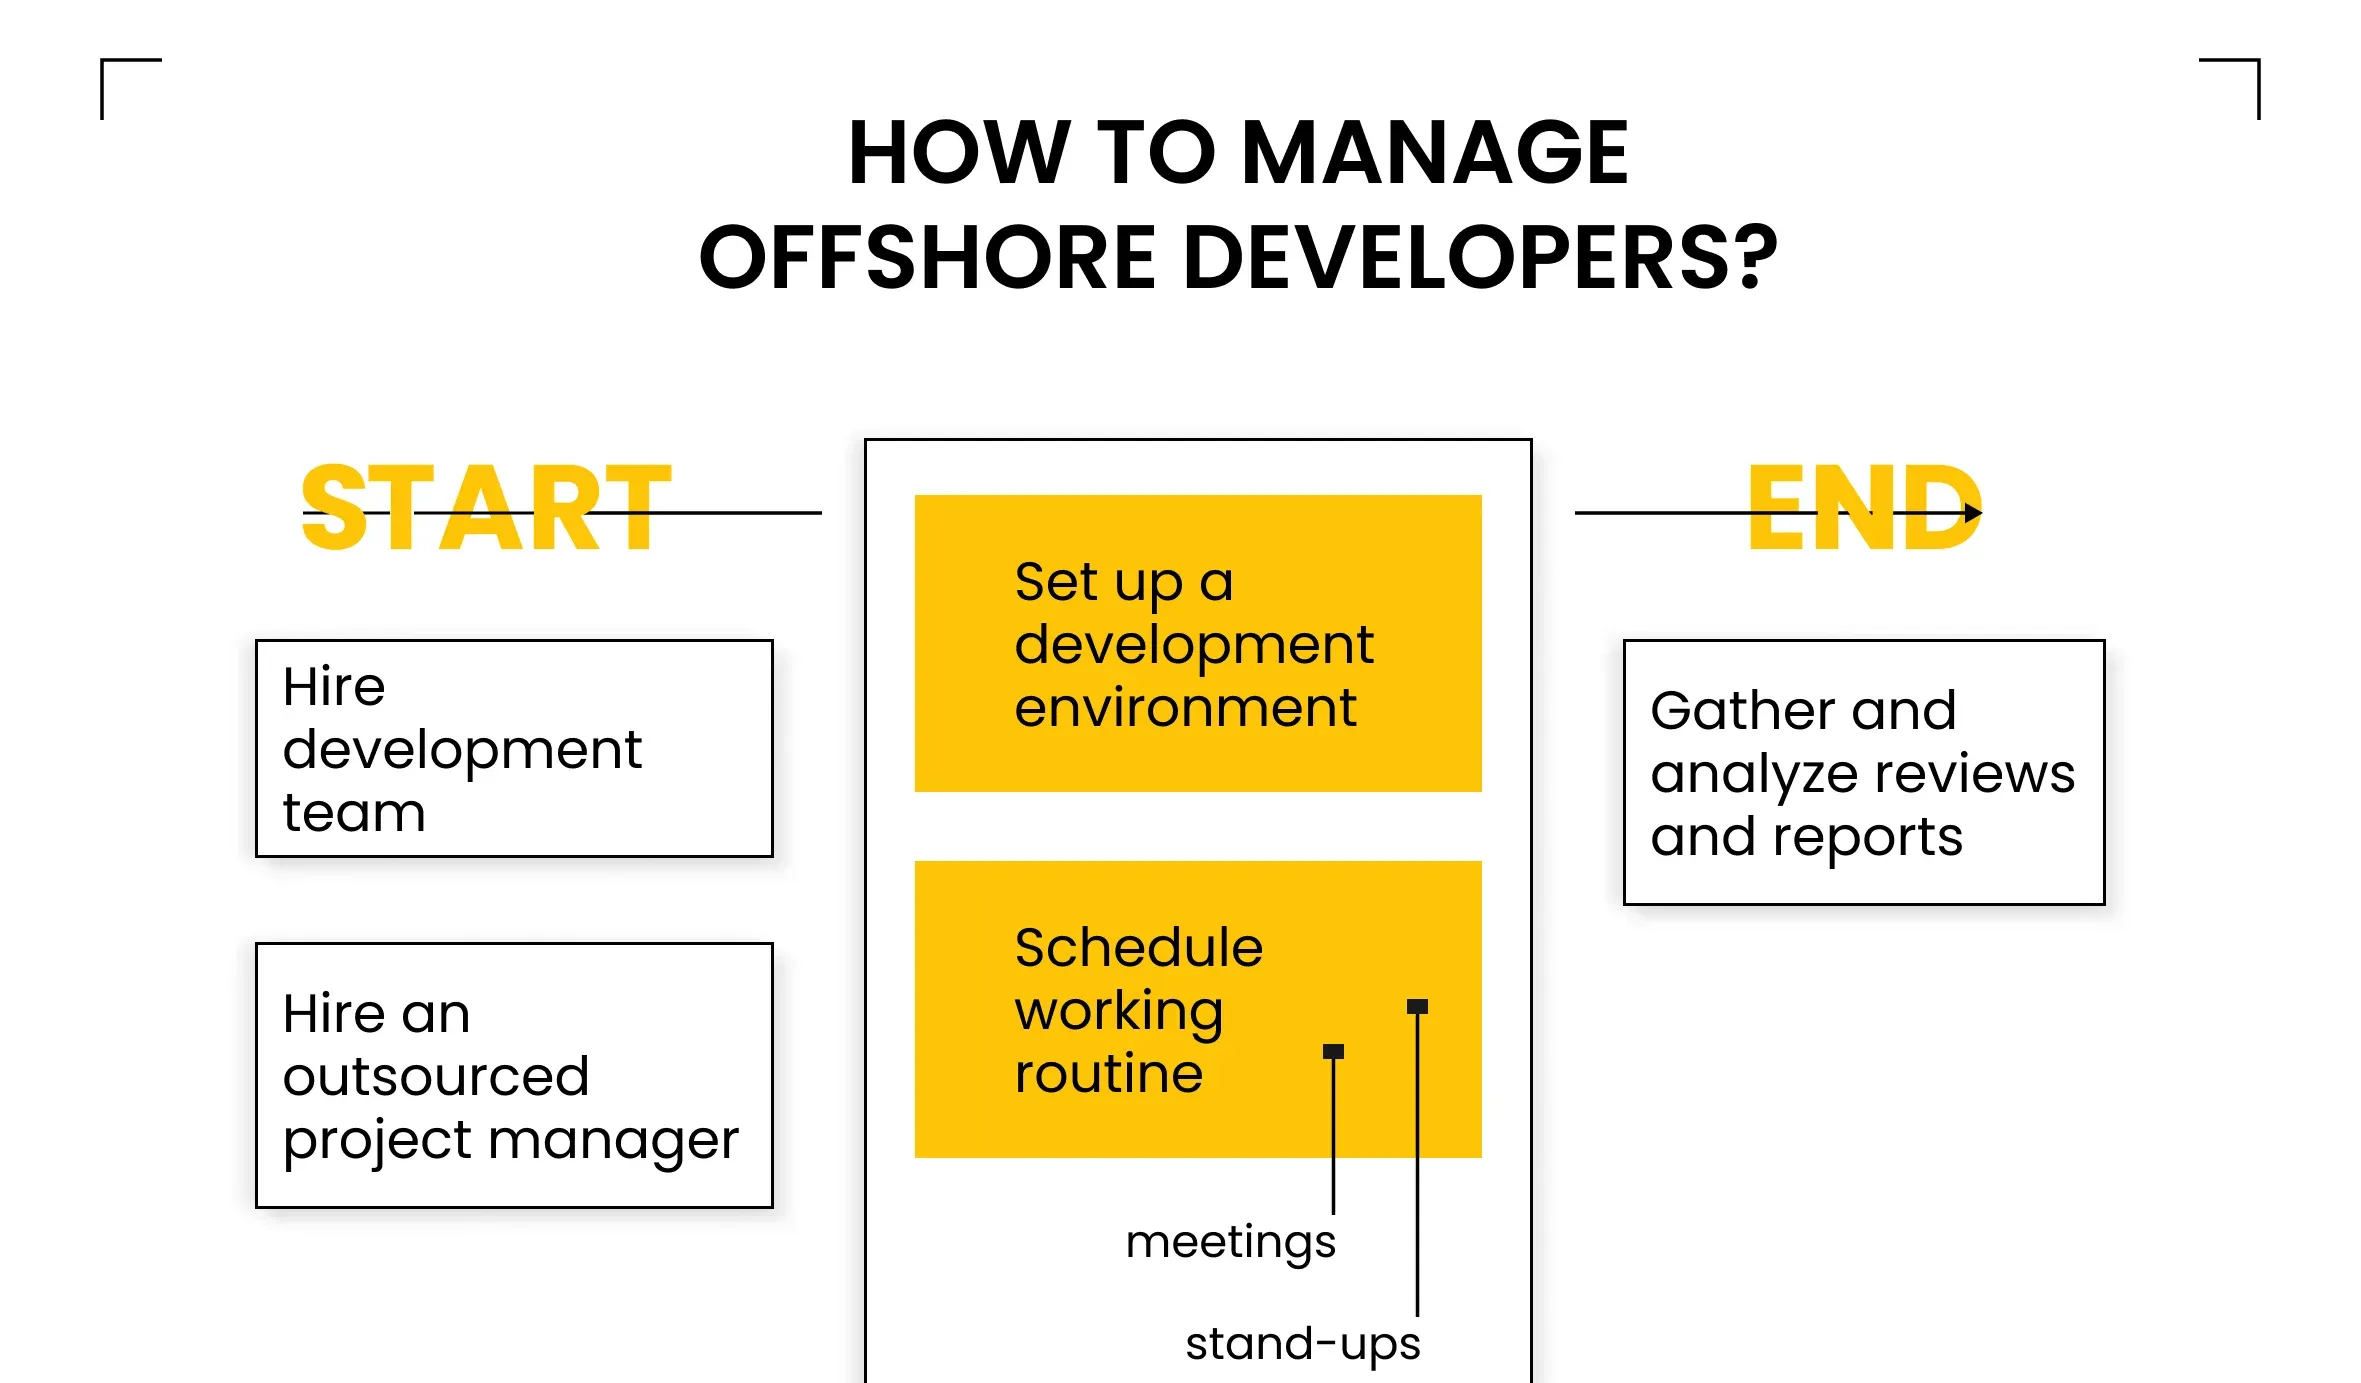 how to manage offshore developers?